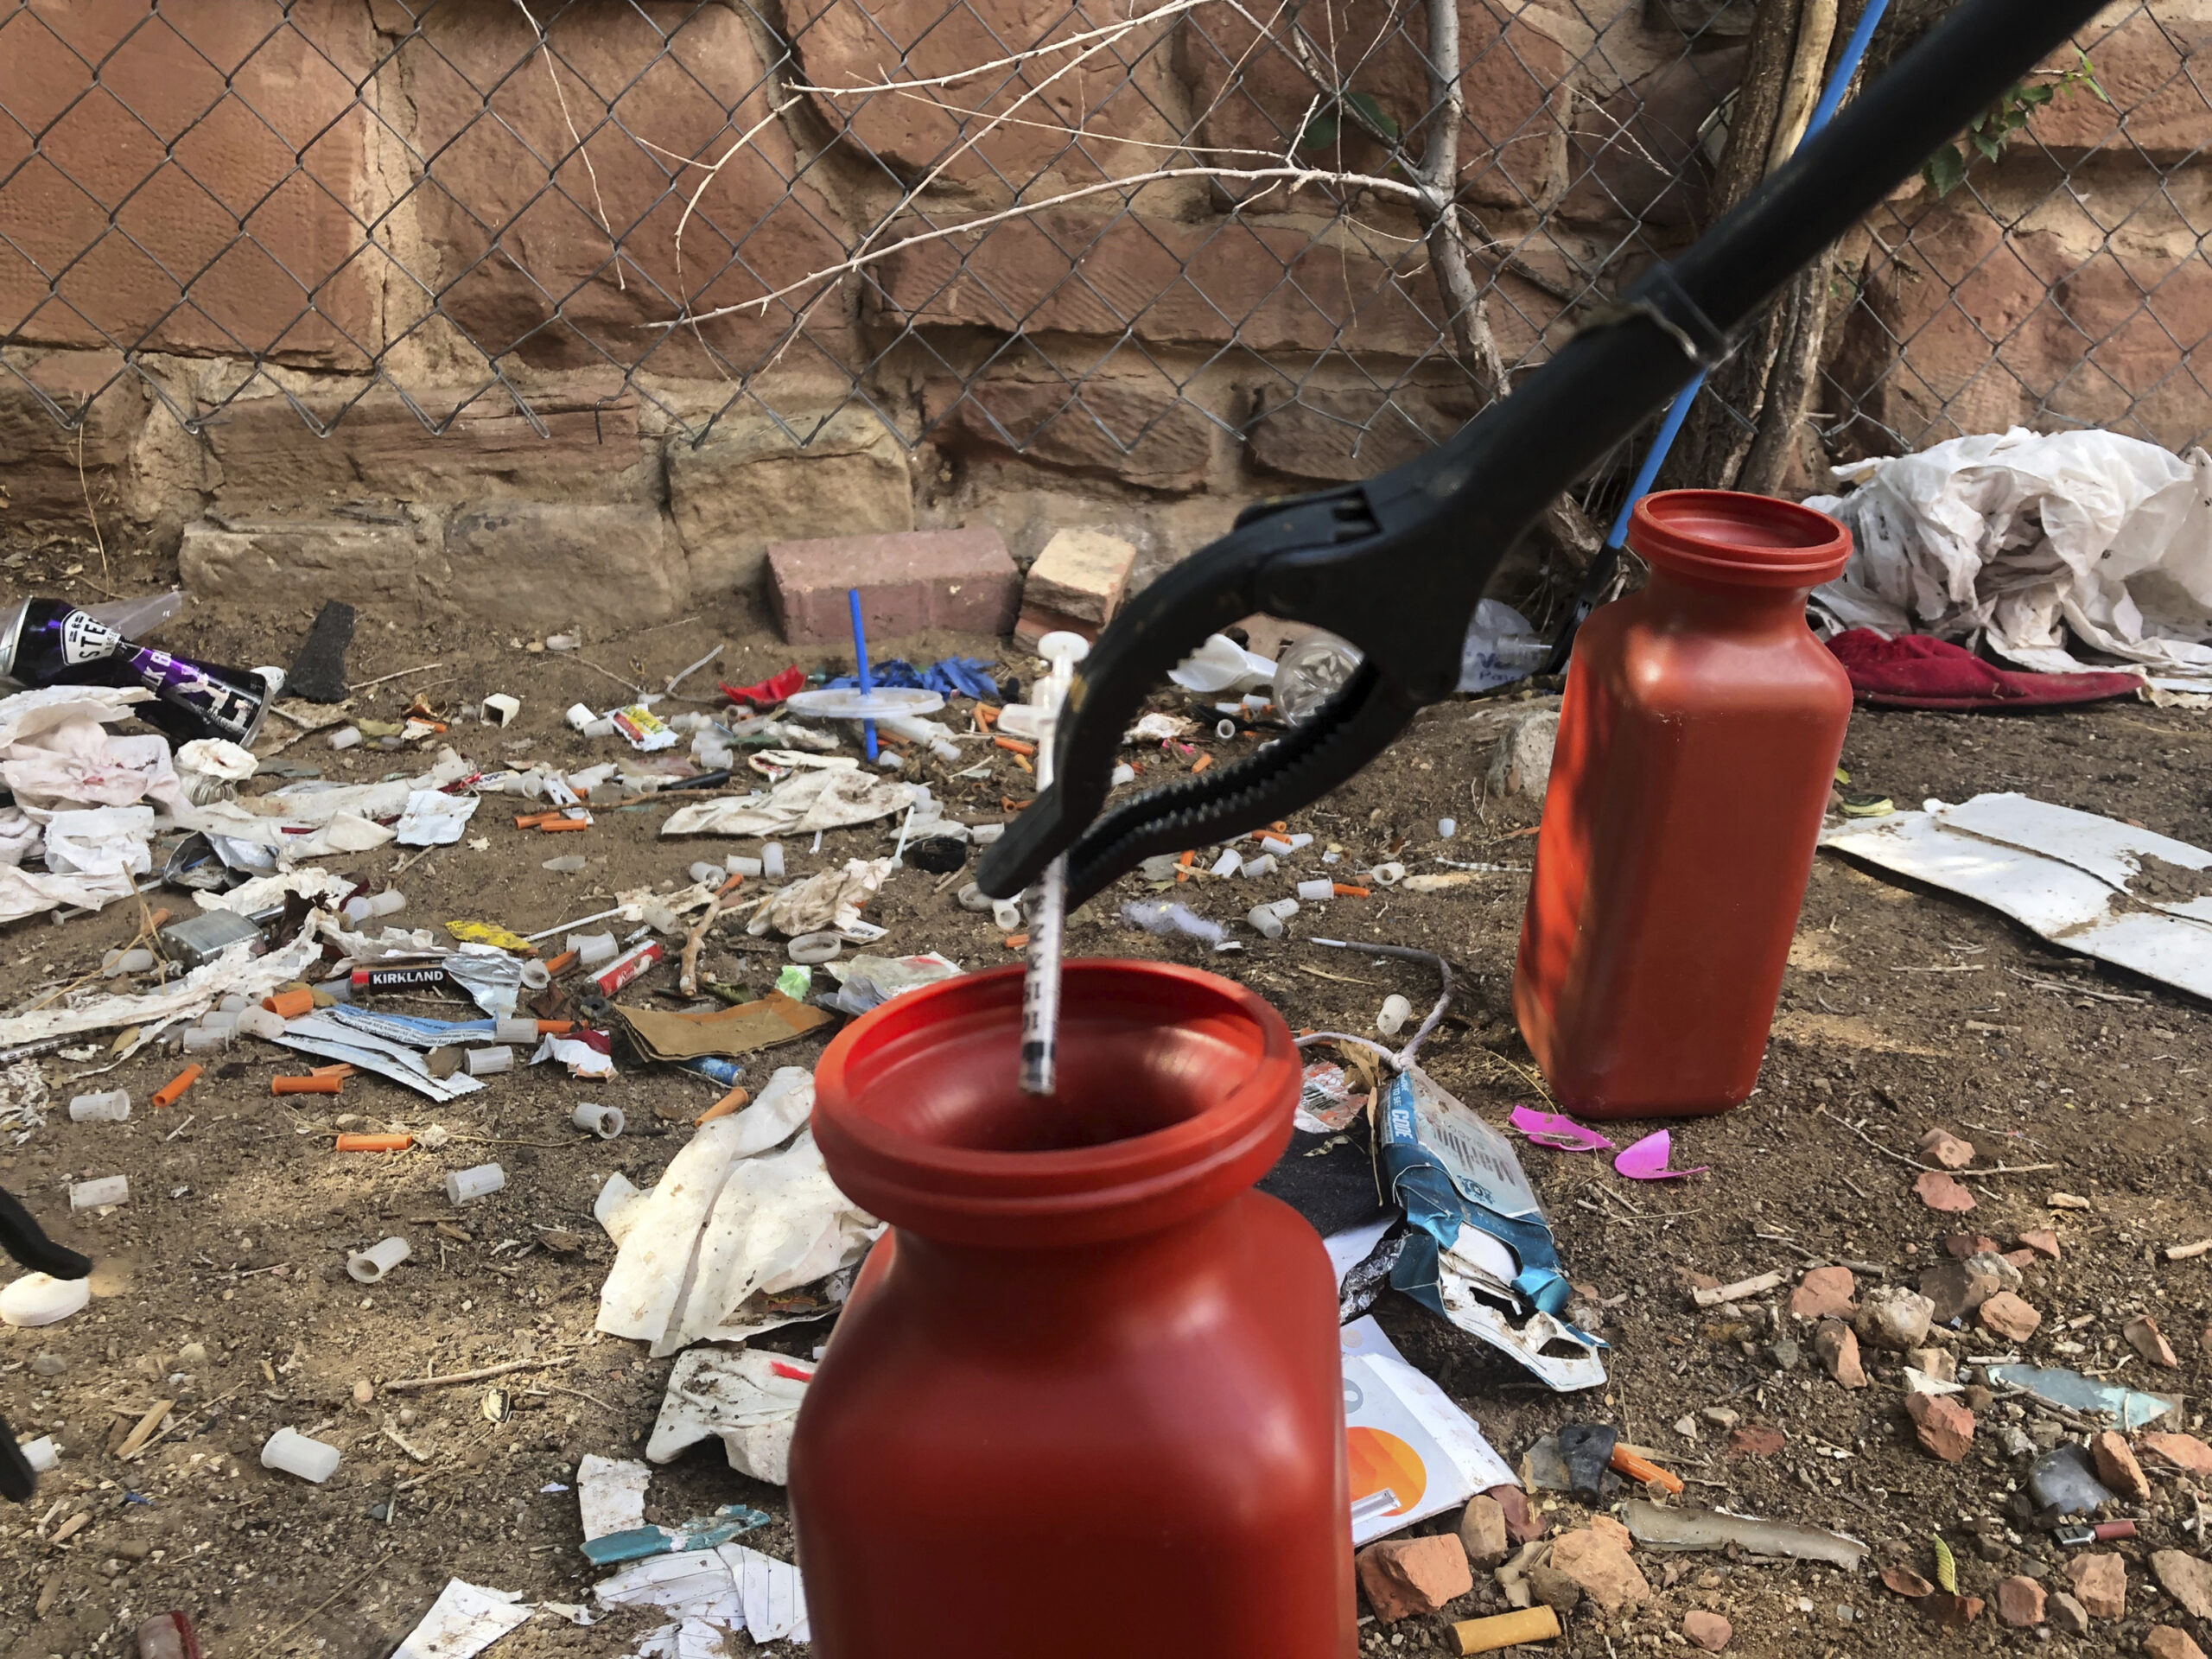 FILE - In this Aug. 9, 2019, file photo, a drug syringe found behind a vacant property in northeast Albuquerque, N.M., is placed into a container, as crews attempt to clear the lot of needles and other heroin paraphernalia. In what would be a first in the U.S., possession of small amounts of heroin, cocaine, LSD and other hard drugs would be decriminalized in Oregon under a ballot measure that voters are deciding on in Tuesday's election. Instead of going to trial and facing possible jail time, a person would have the option of paying a $100 fine or attend new "addiction recovery centers." (AP Photo/Mary Hudetz, File)